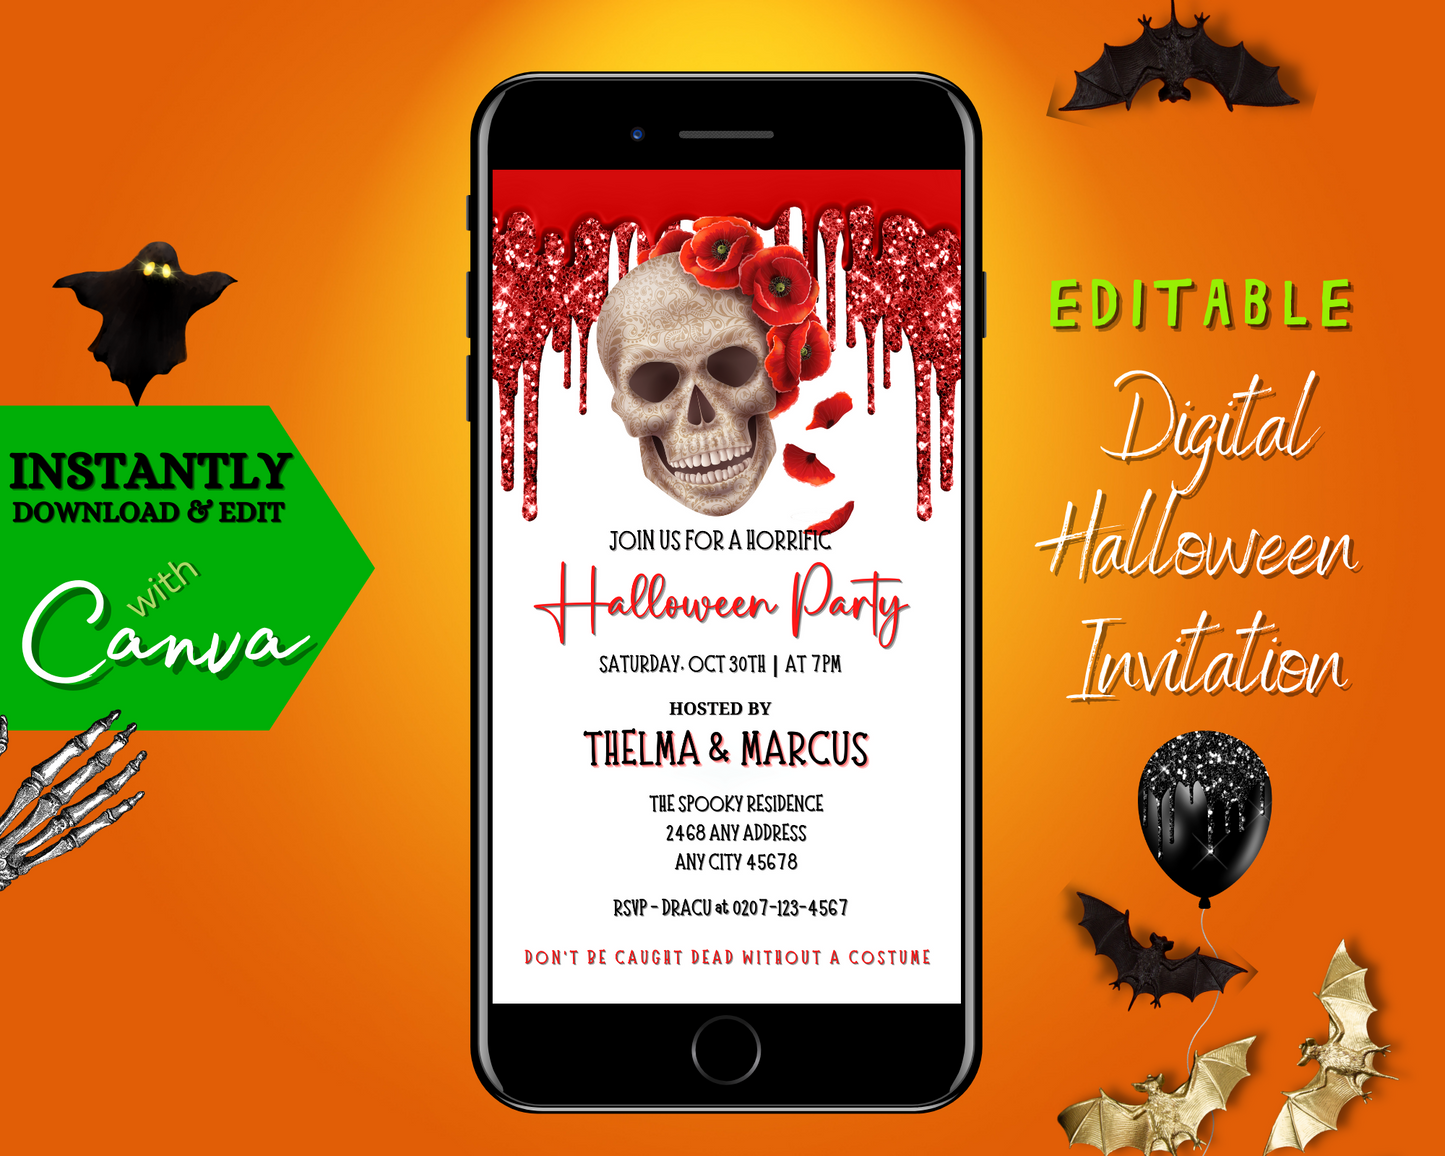 Dripping Red Fancy Rosey Skull | Halloween Evite: Digital invitation template featuring a skull with red flowers and drippings, editable via Canva for personalized messaging.